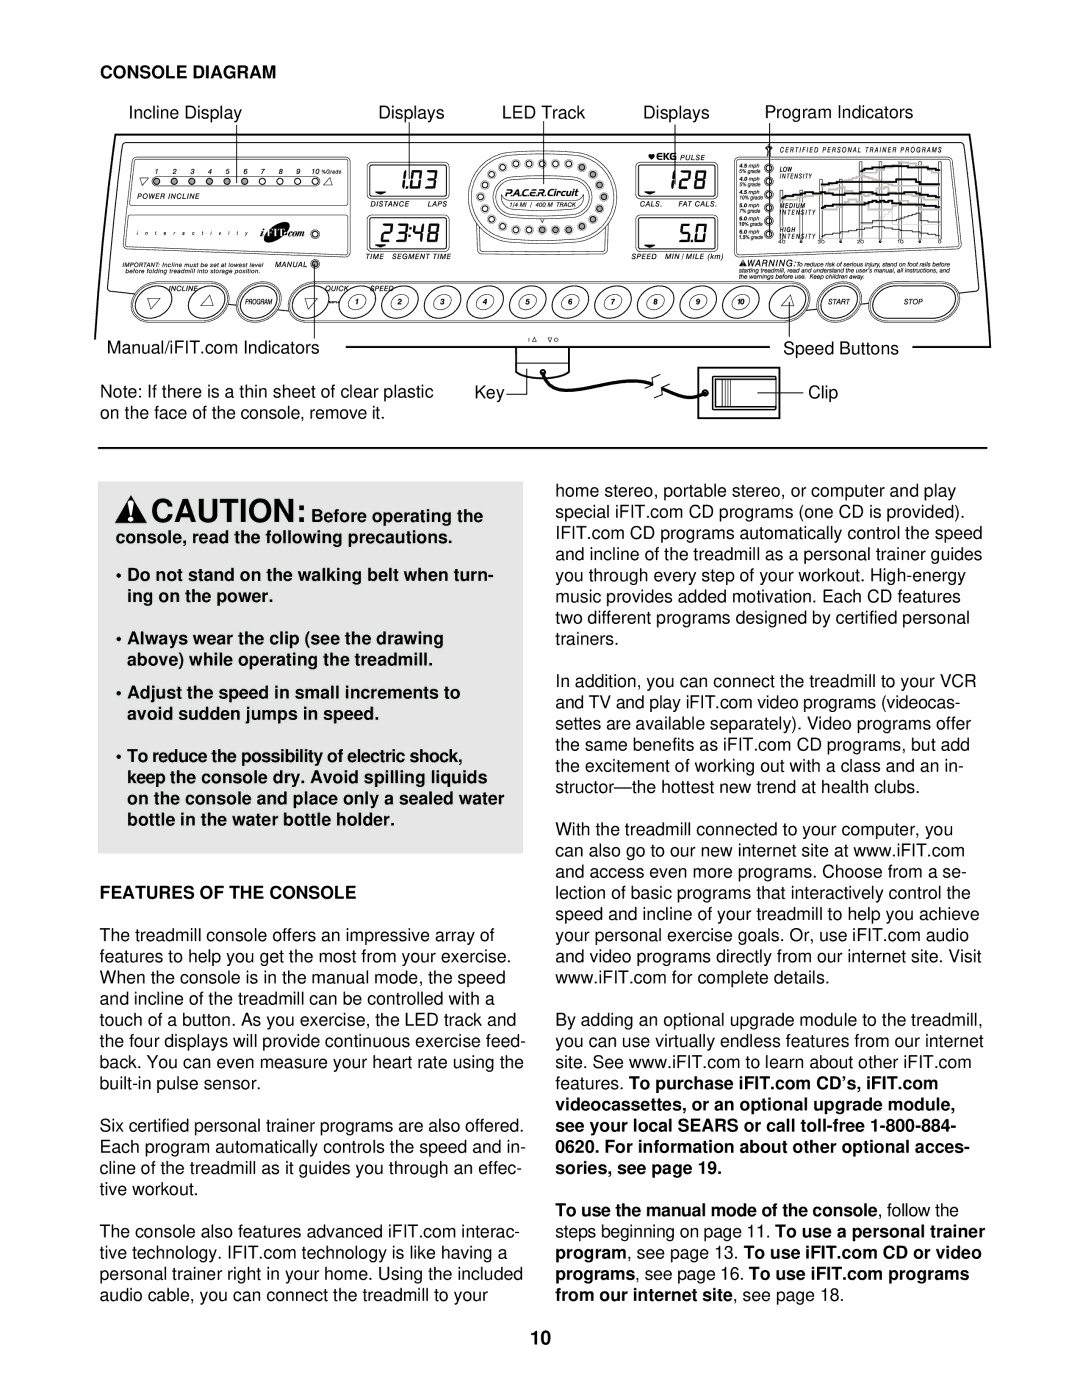 ProForm 831.299483 user manual Console Diagram, Features of the Console 